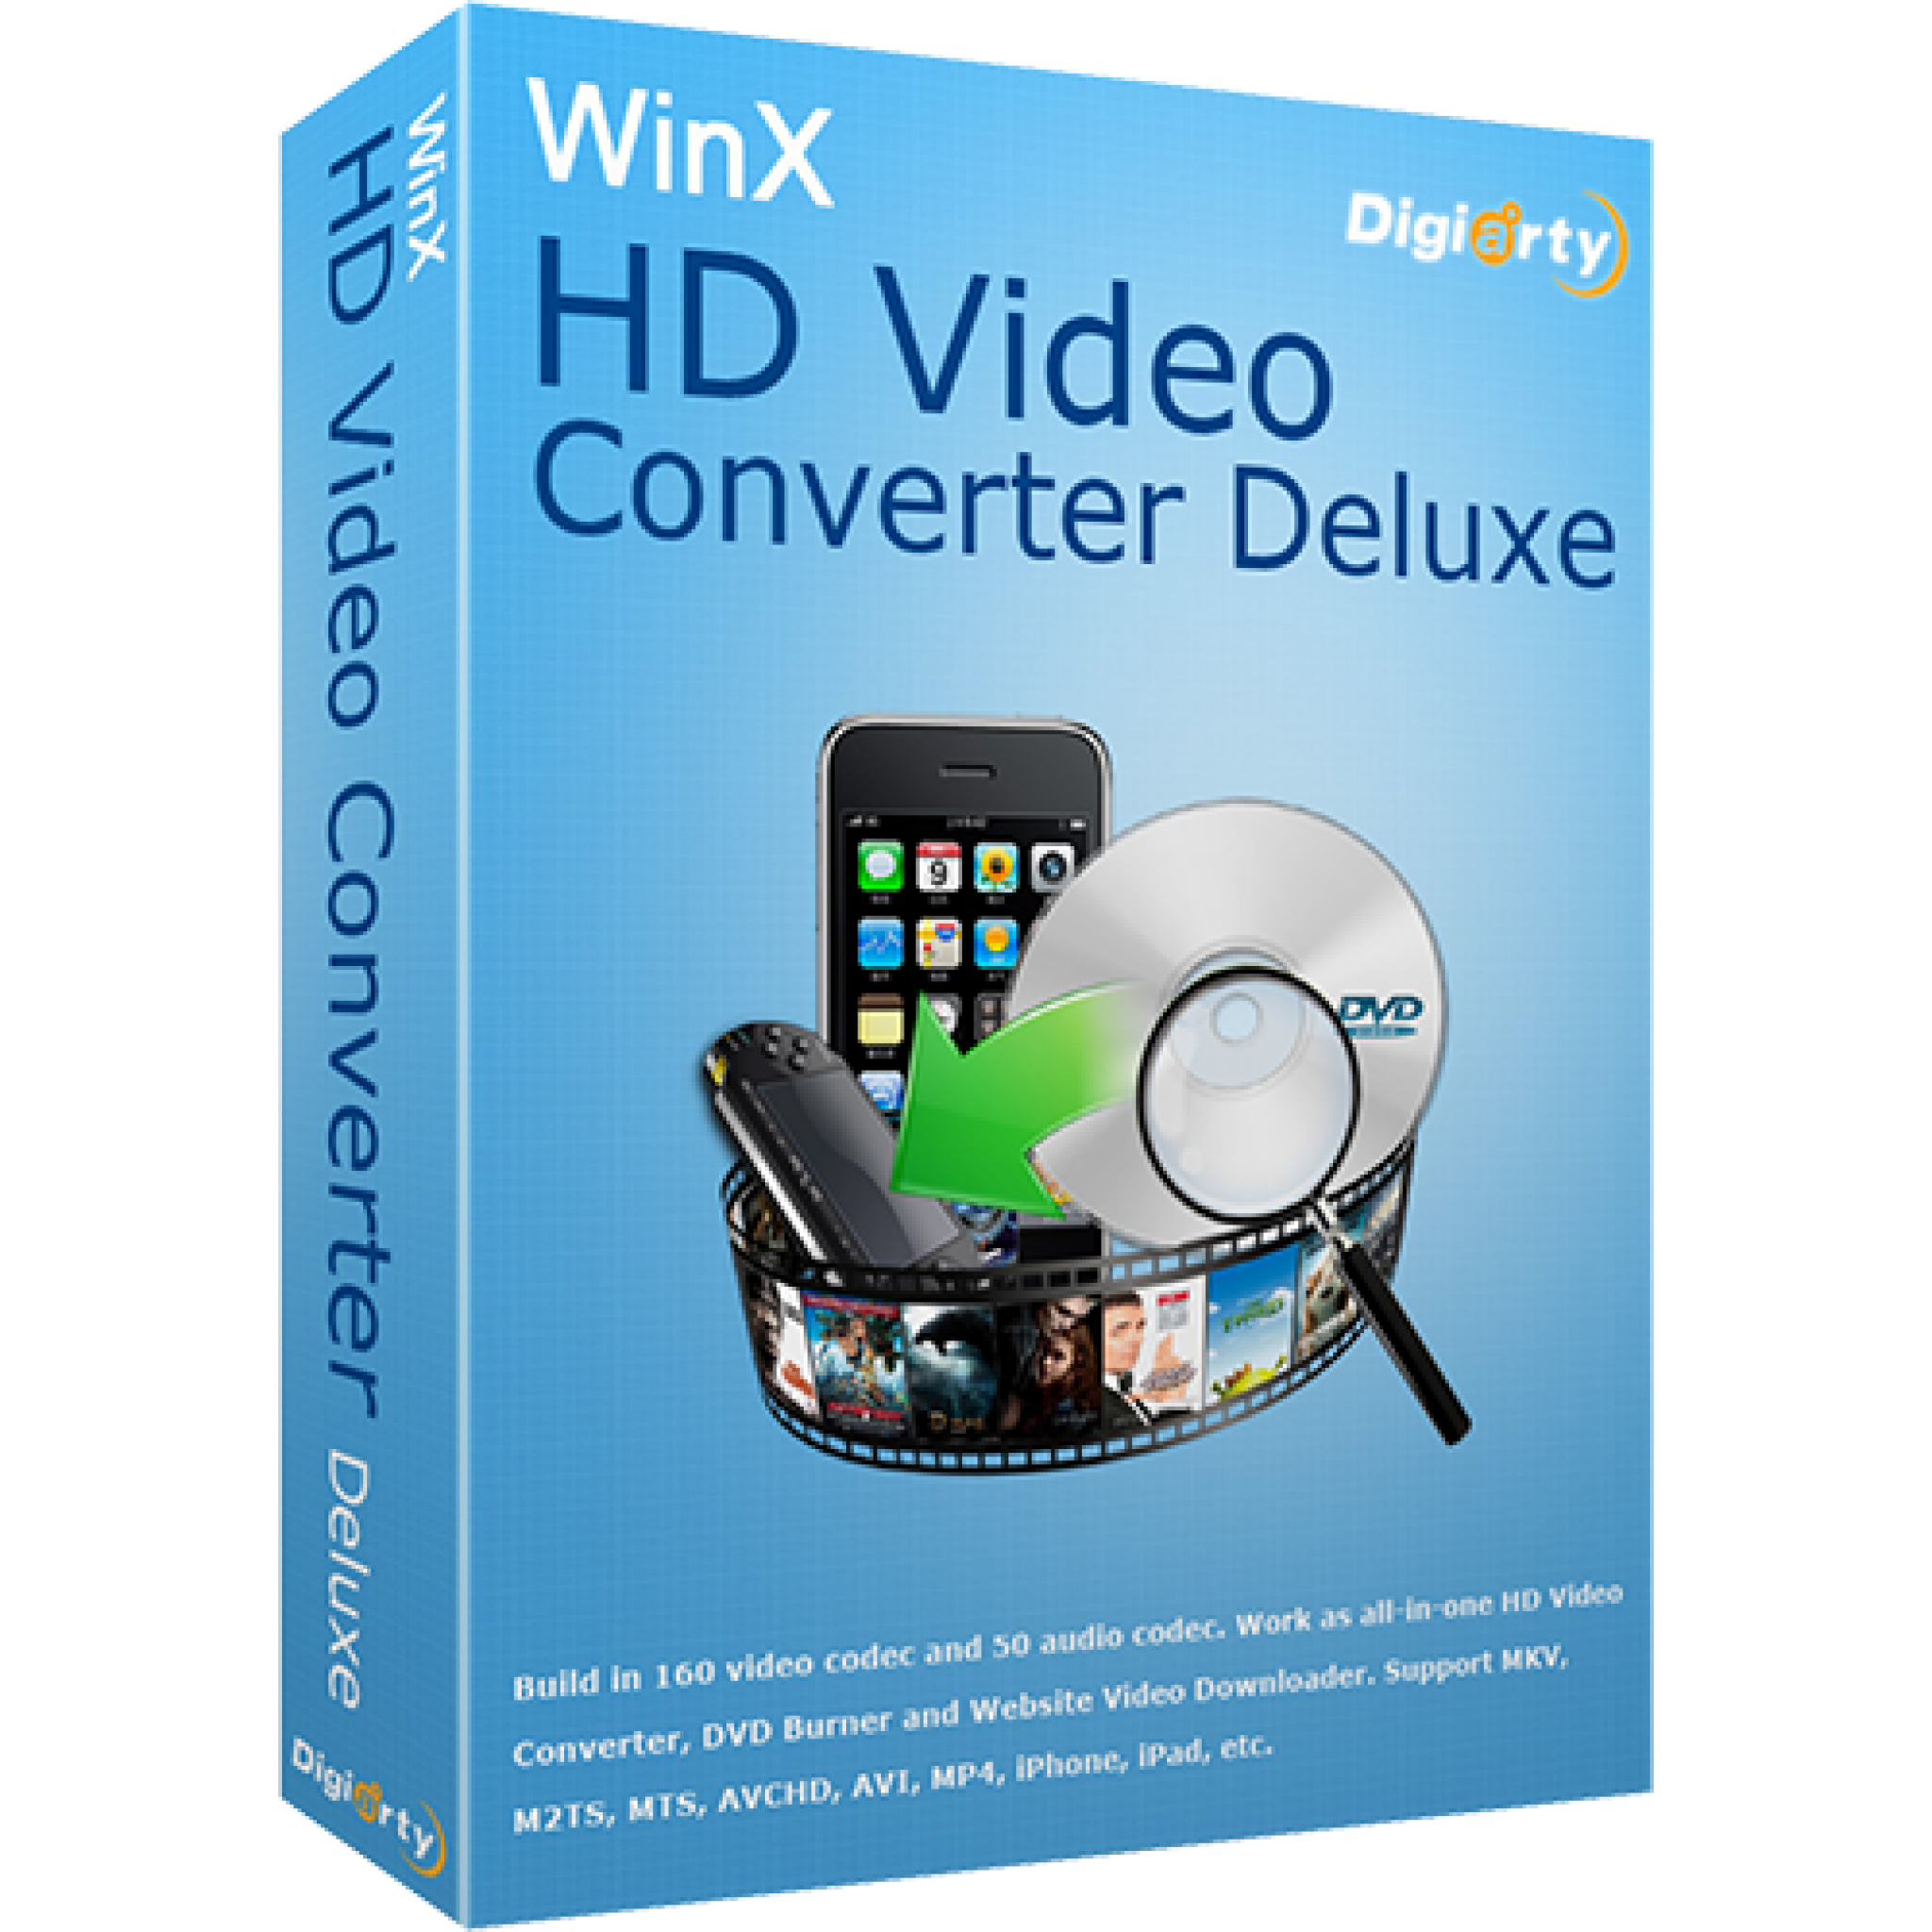 WinX HD Video Converter Deluxe 5.18.1.342 instal the new version for windows